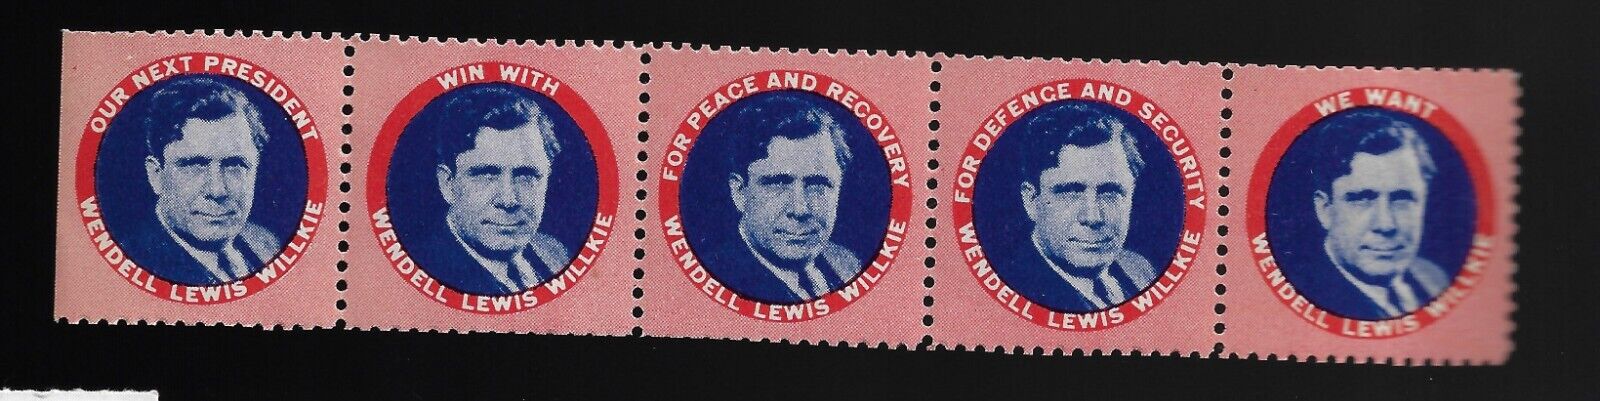 5-1940 Wendell Willkie Presidential Stamps With Different Campaign Slogans